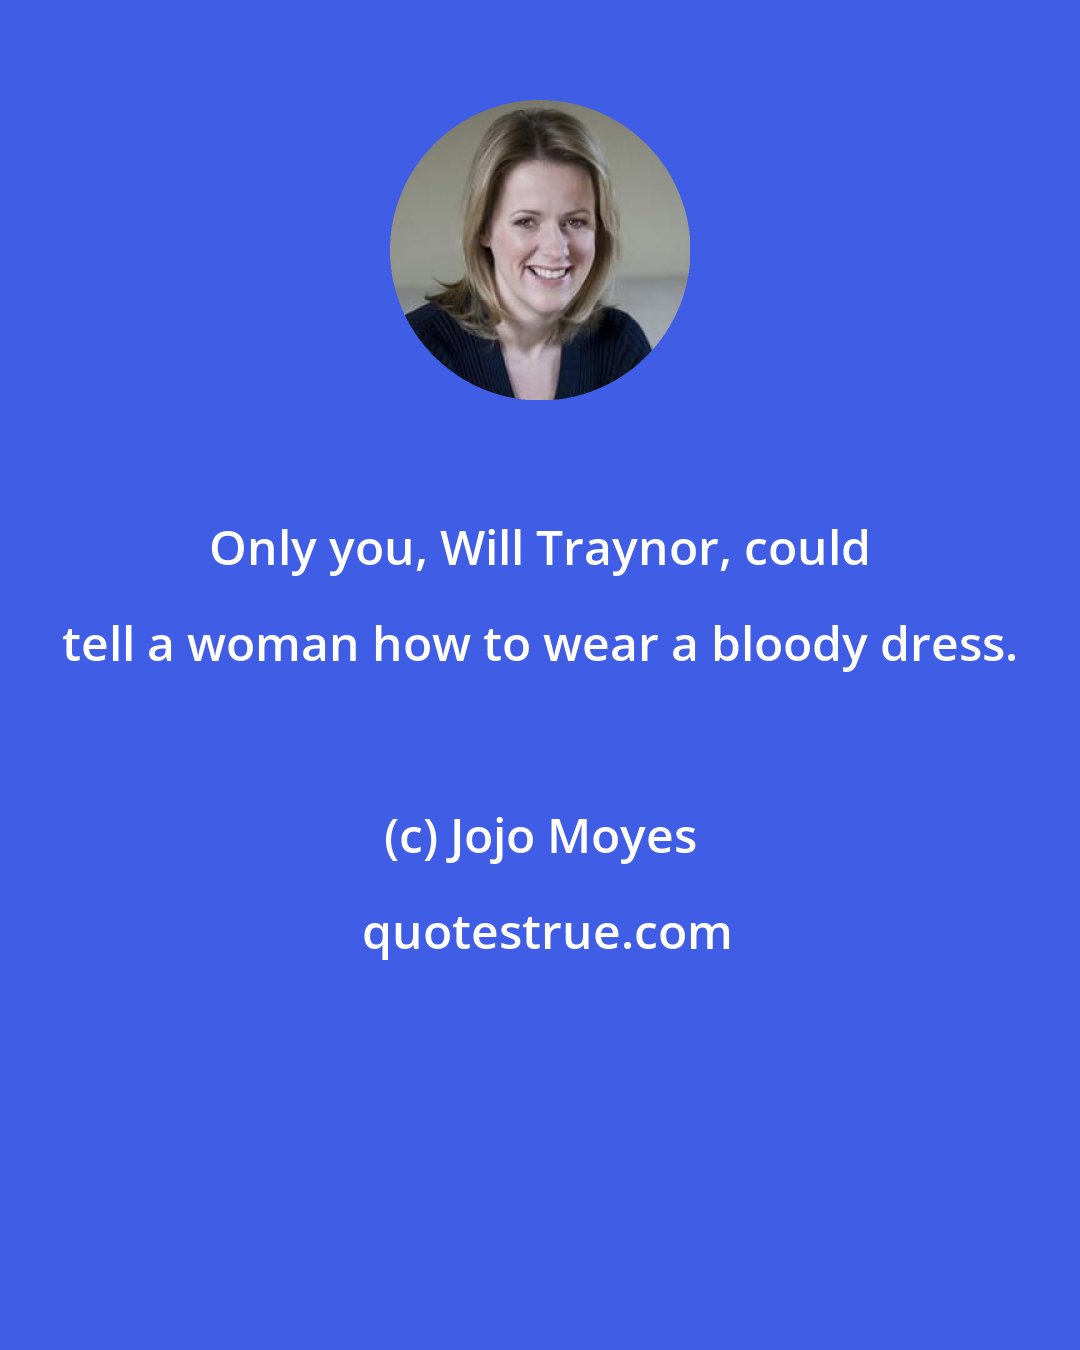 Jojo Moyes: Only you, Will Traynor, could tell a woman how to wear a bloody dress.